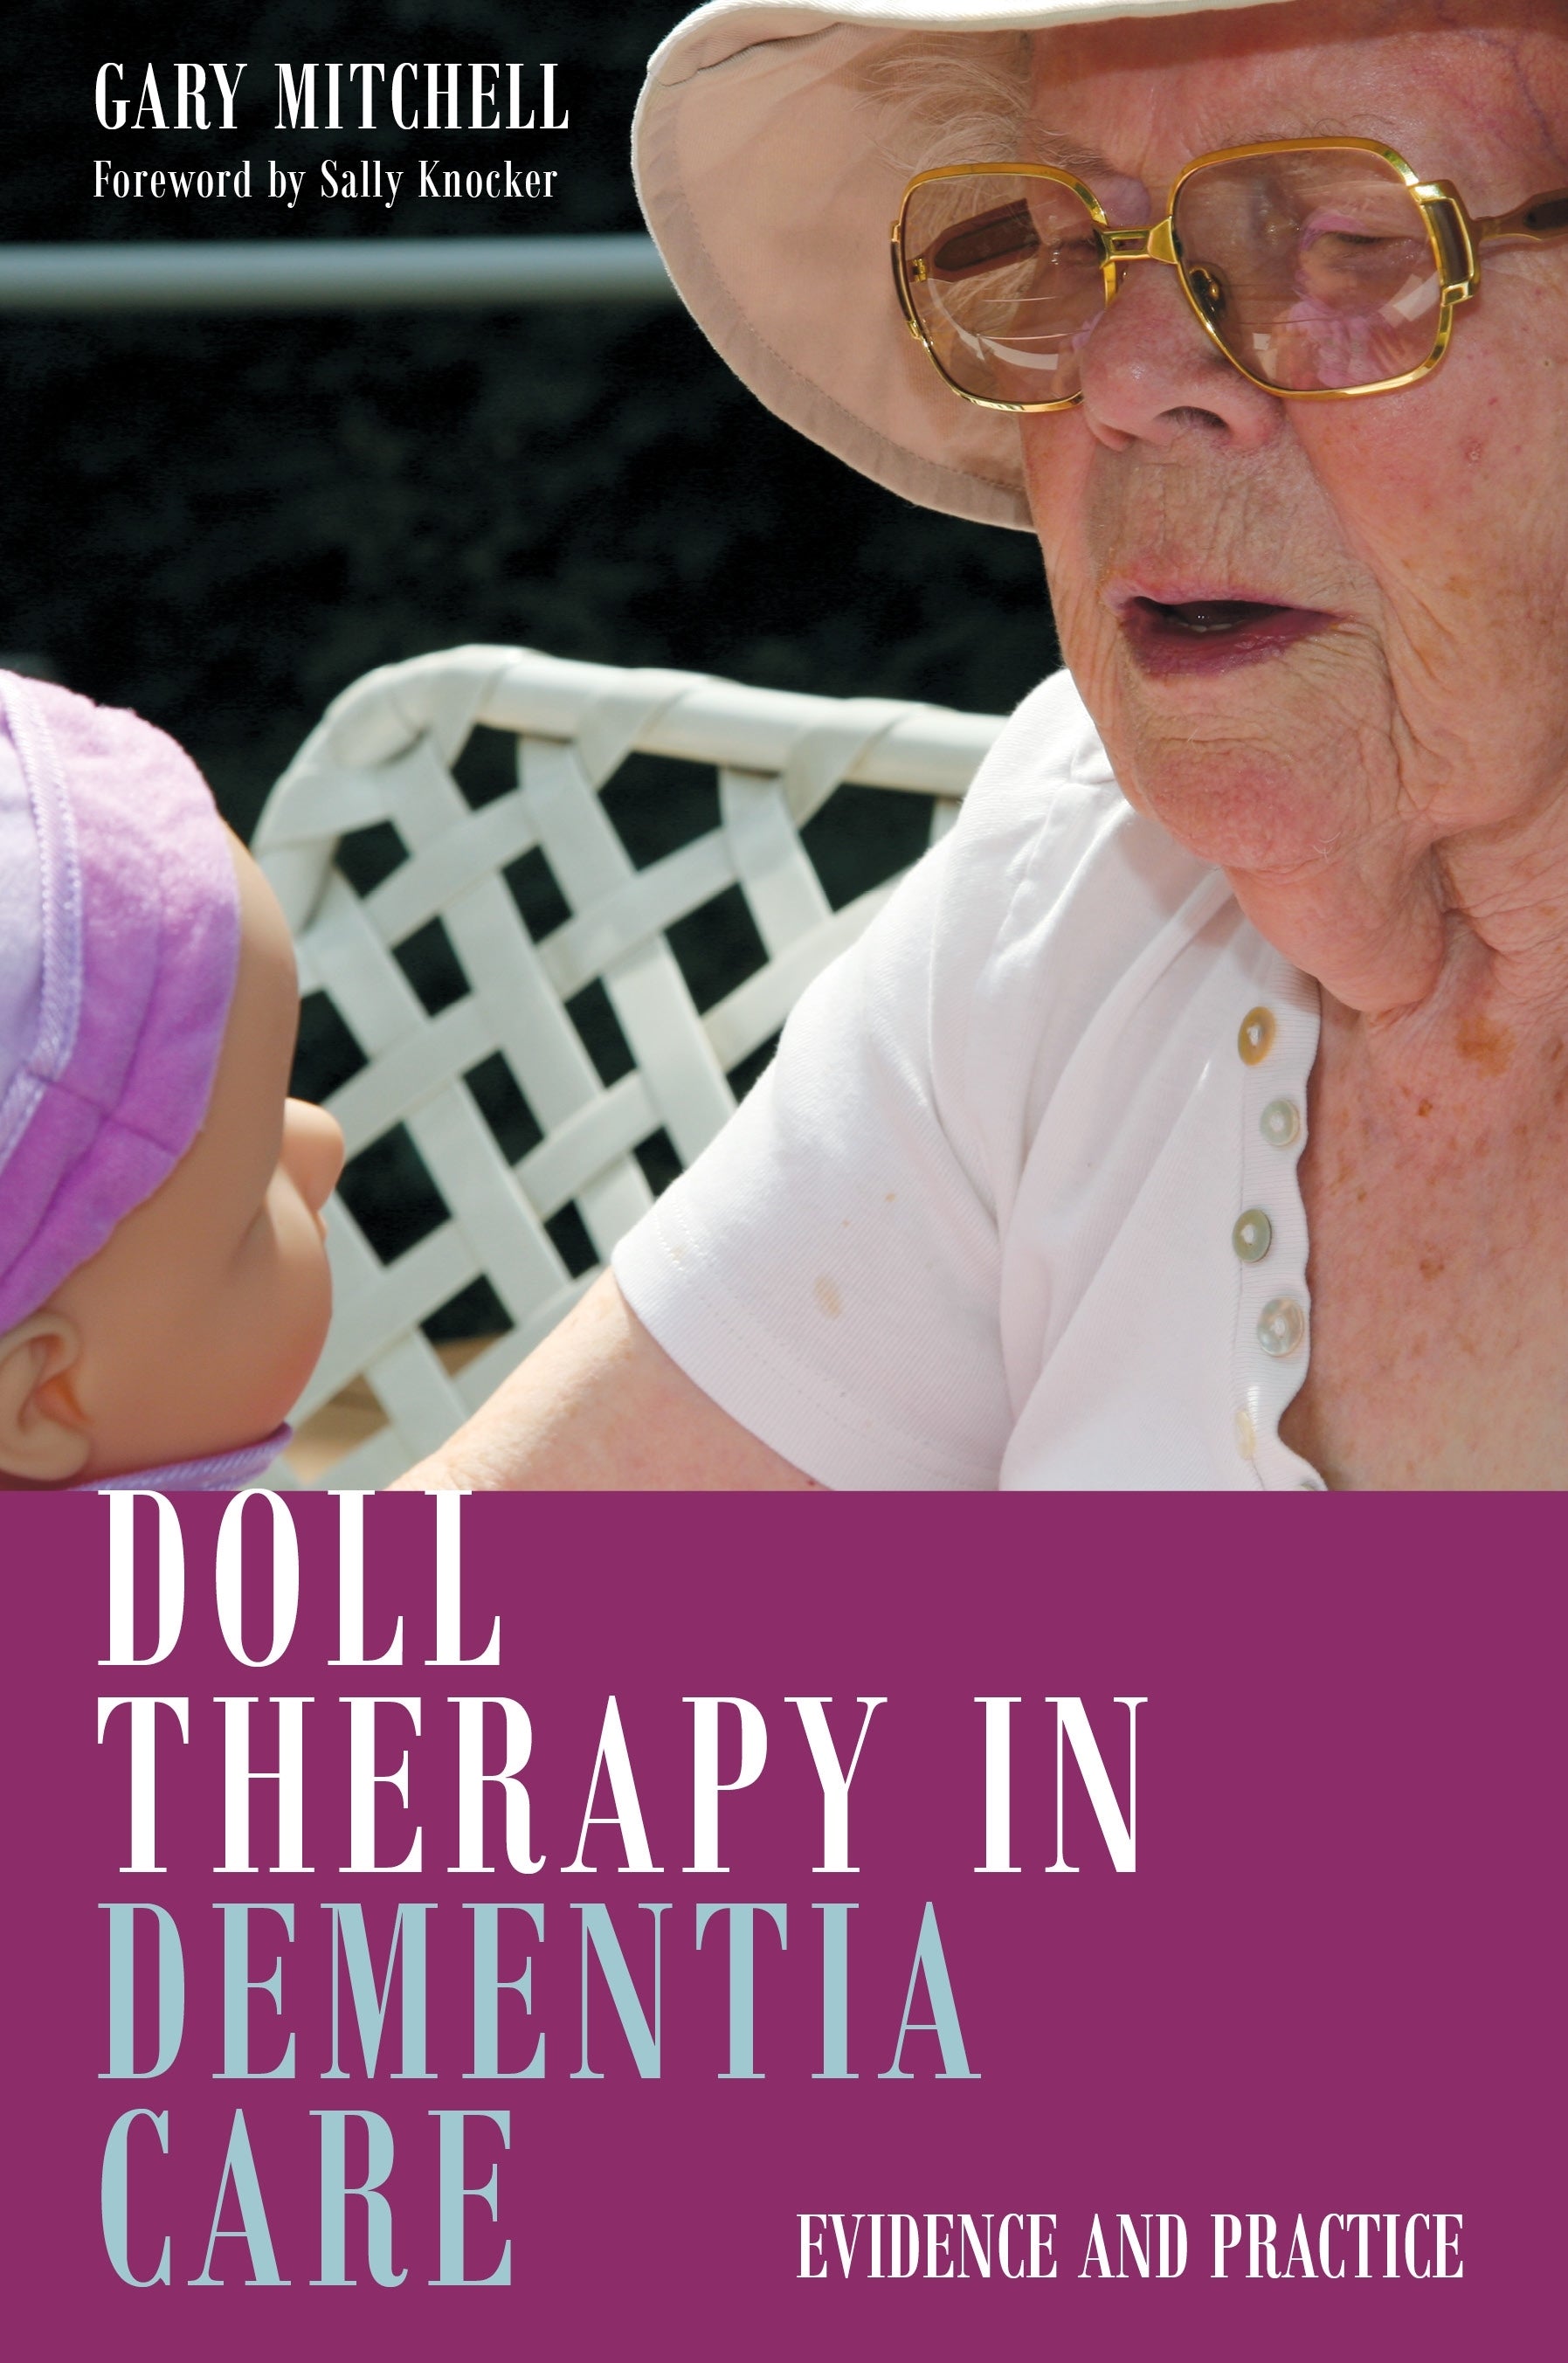 Doll Therapy in Dementia Care by Gary Mitchell, Sally Knocker